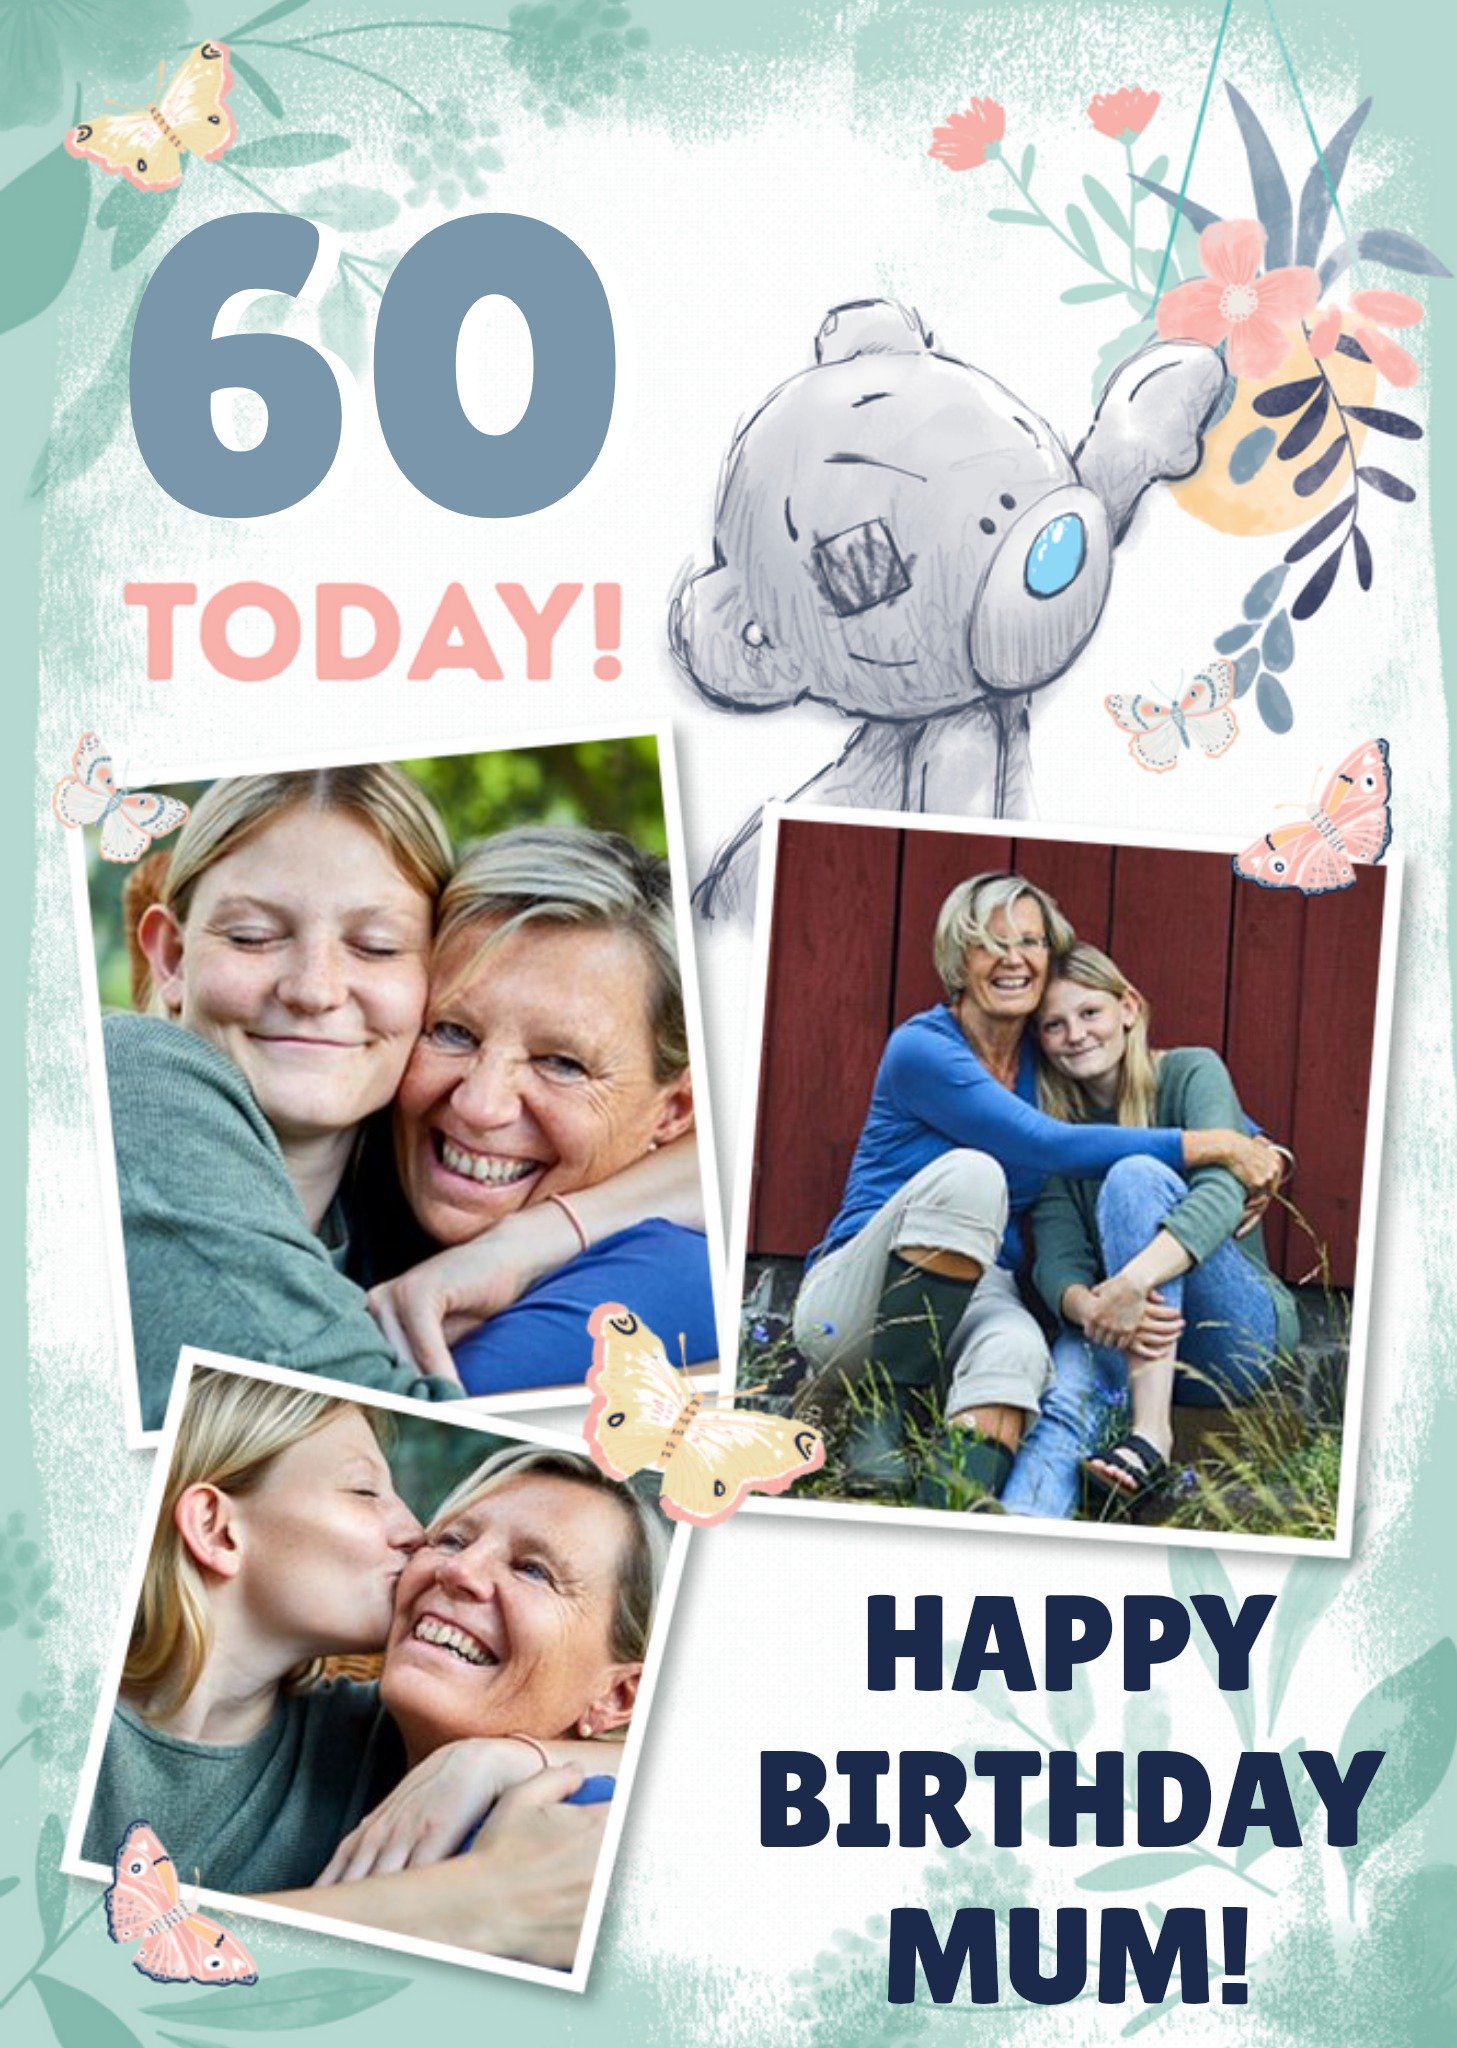 Me To You Tatty Teddy 60 Today Mum Birthday Photo Upload Card, Large